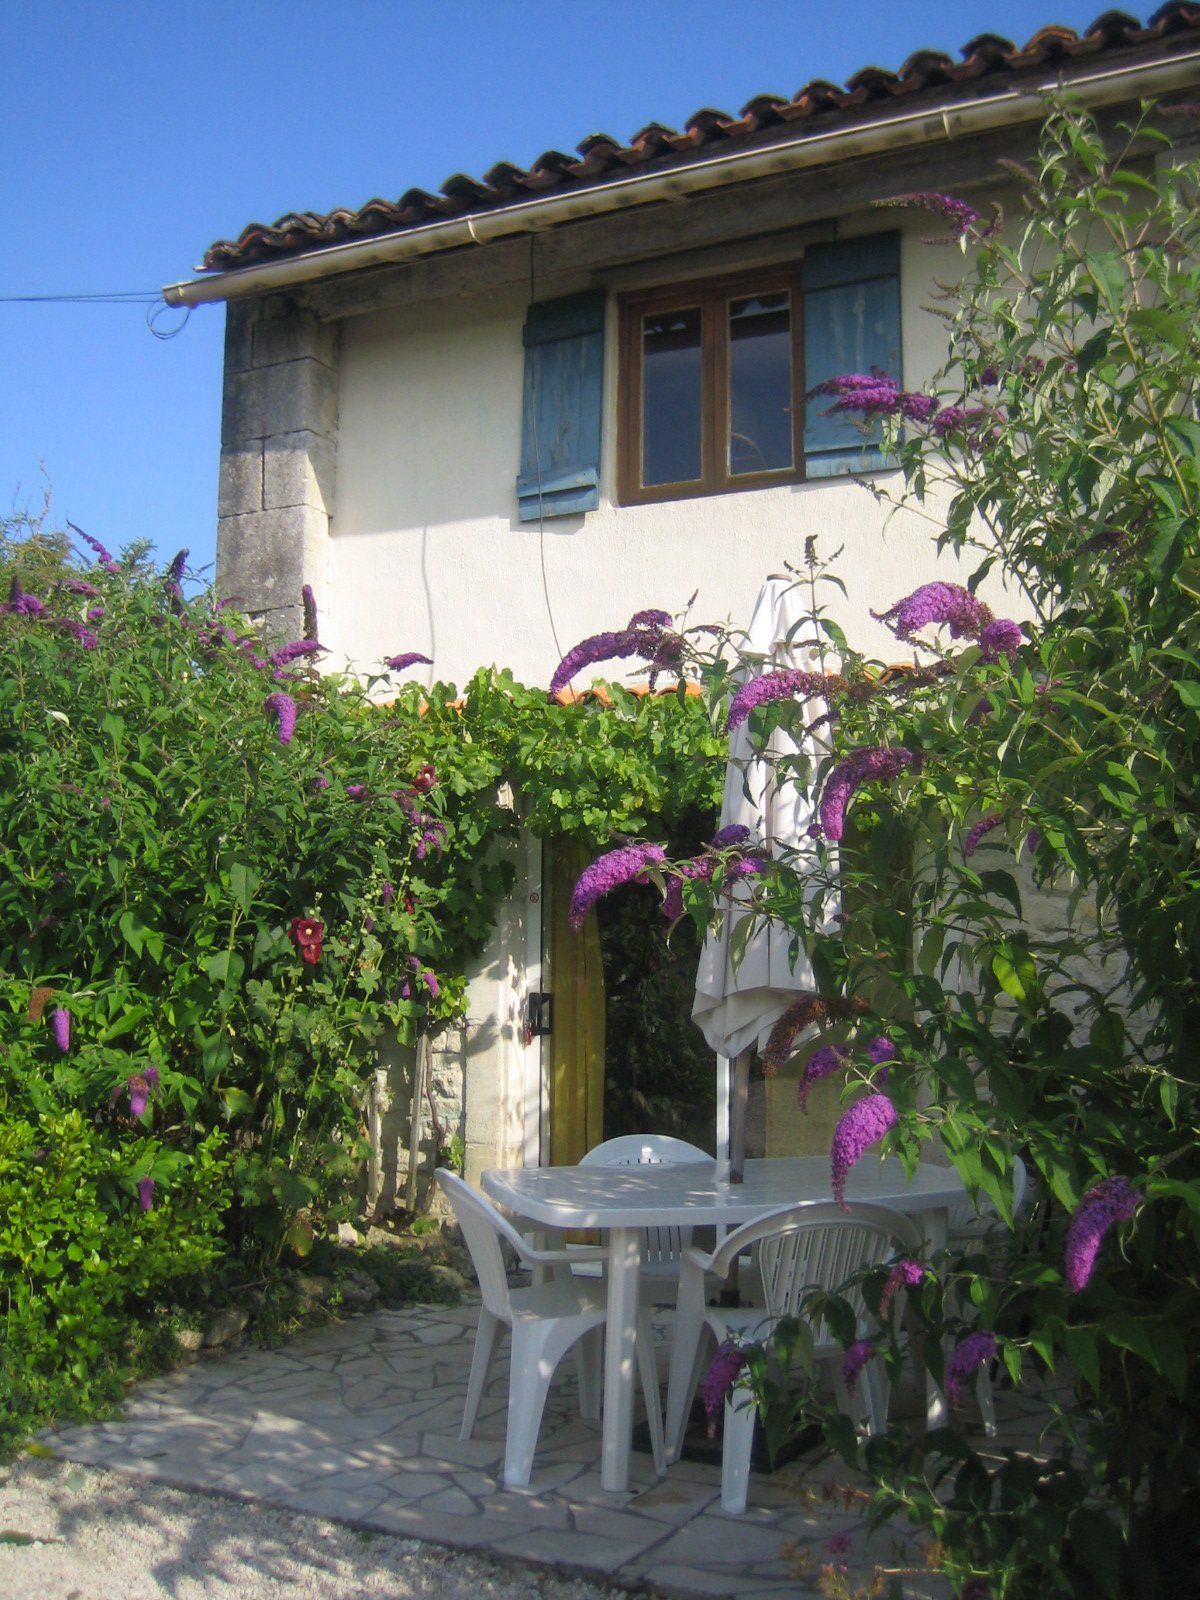 holiday cottage with budlea bushes with purple flowers